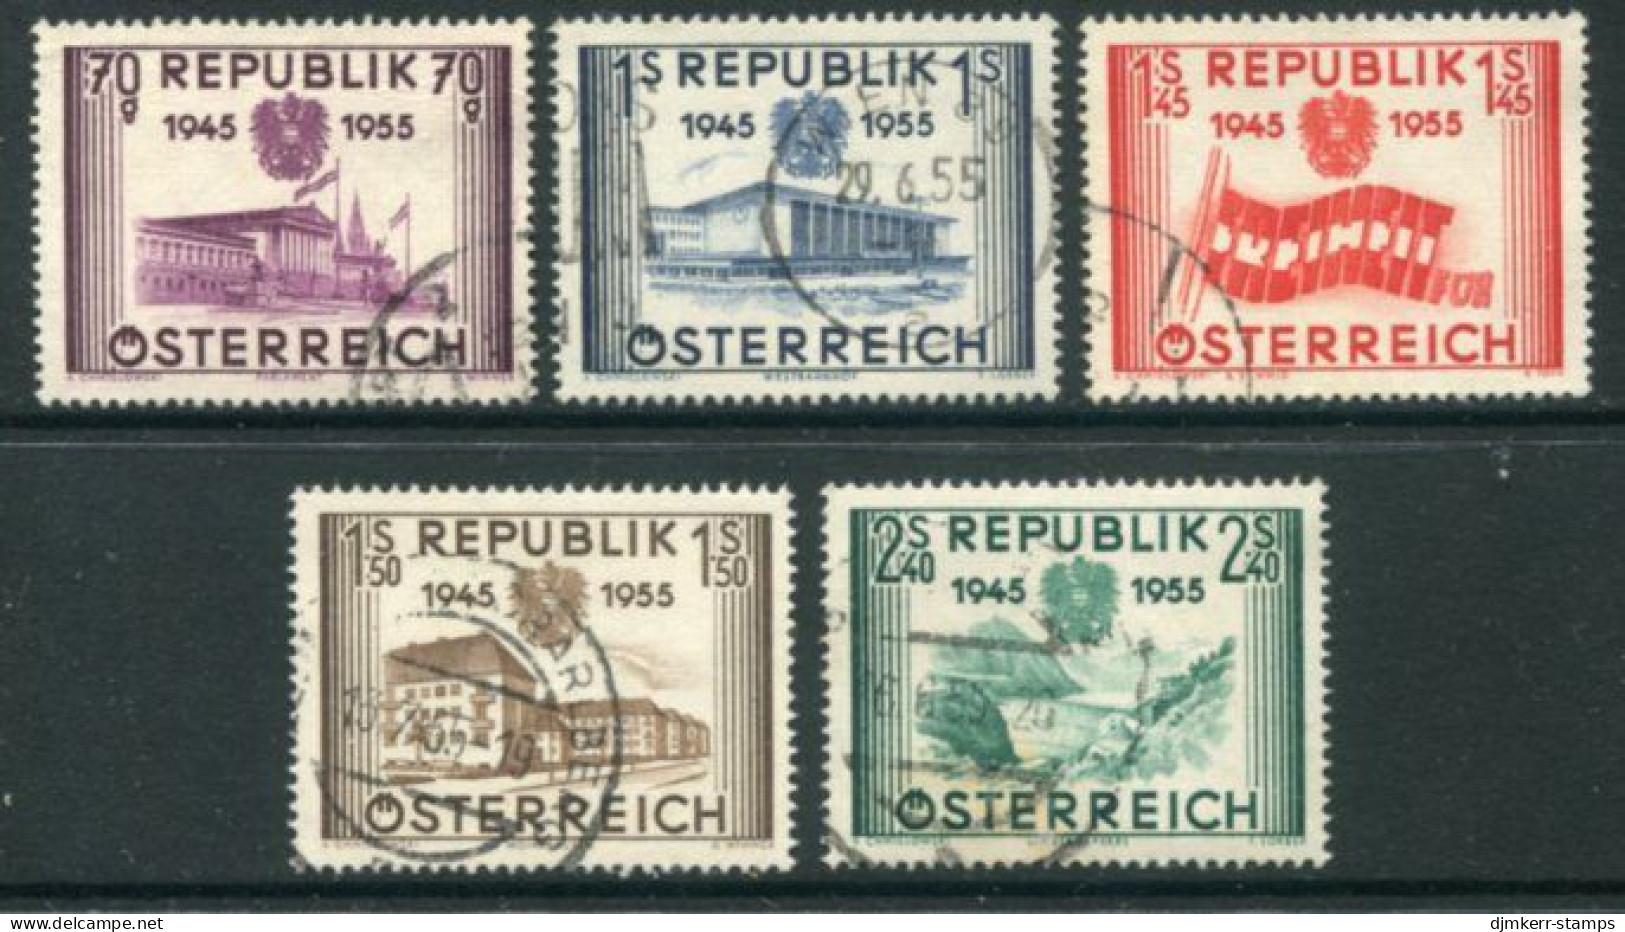 AUSTRIA 1955 Anniversary Of Republic Set Used.  Michel 1012-16 - Used Stamps